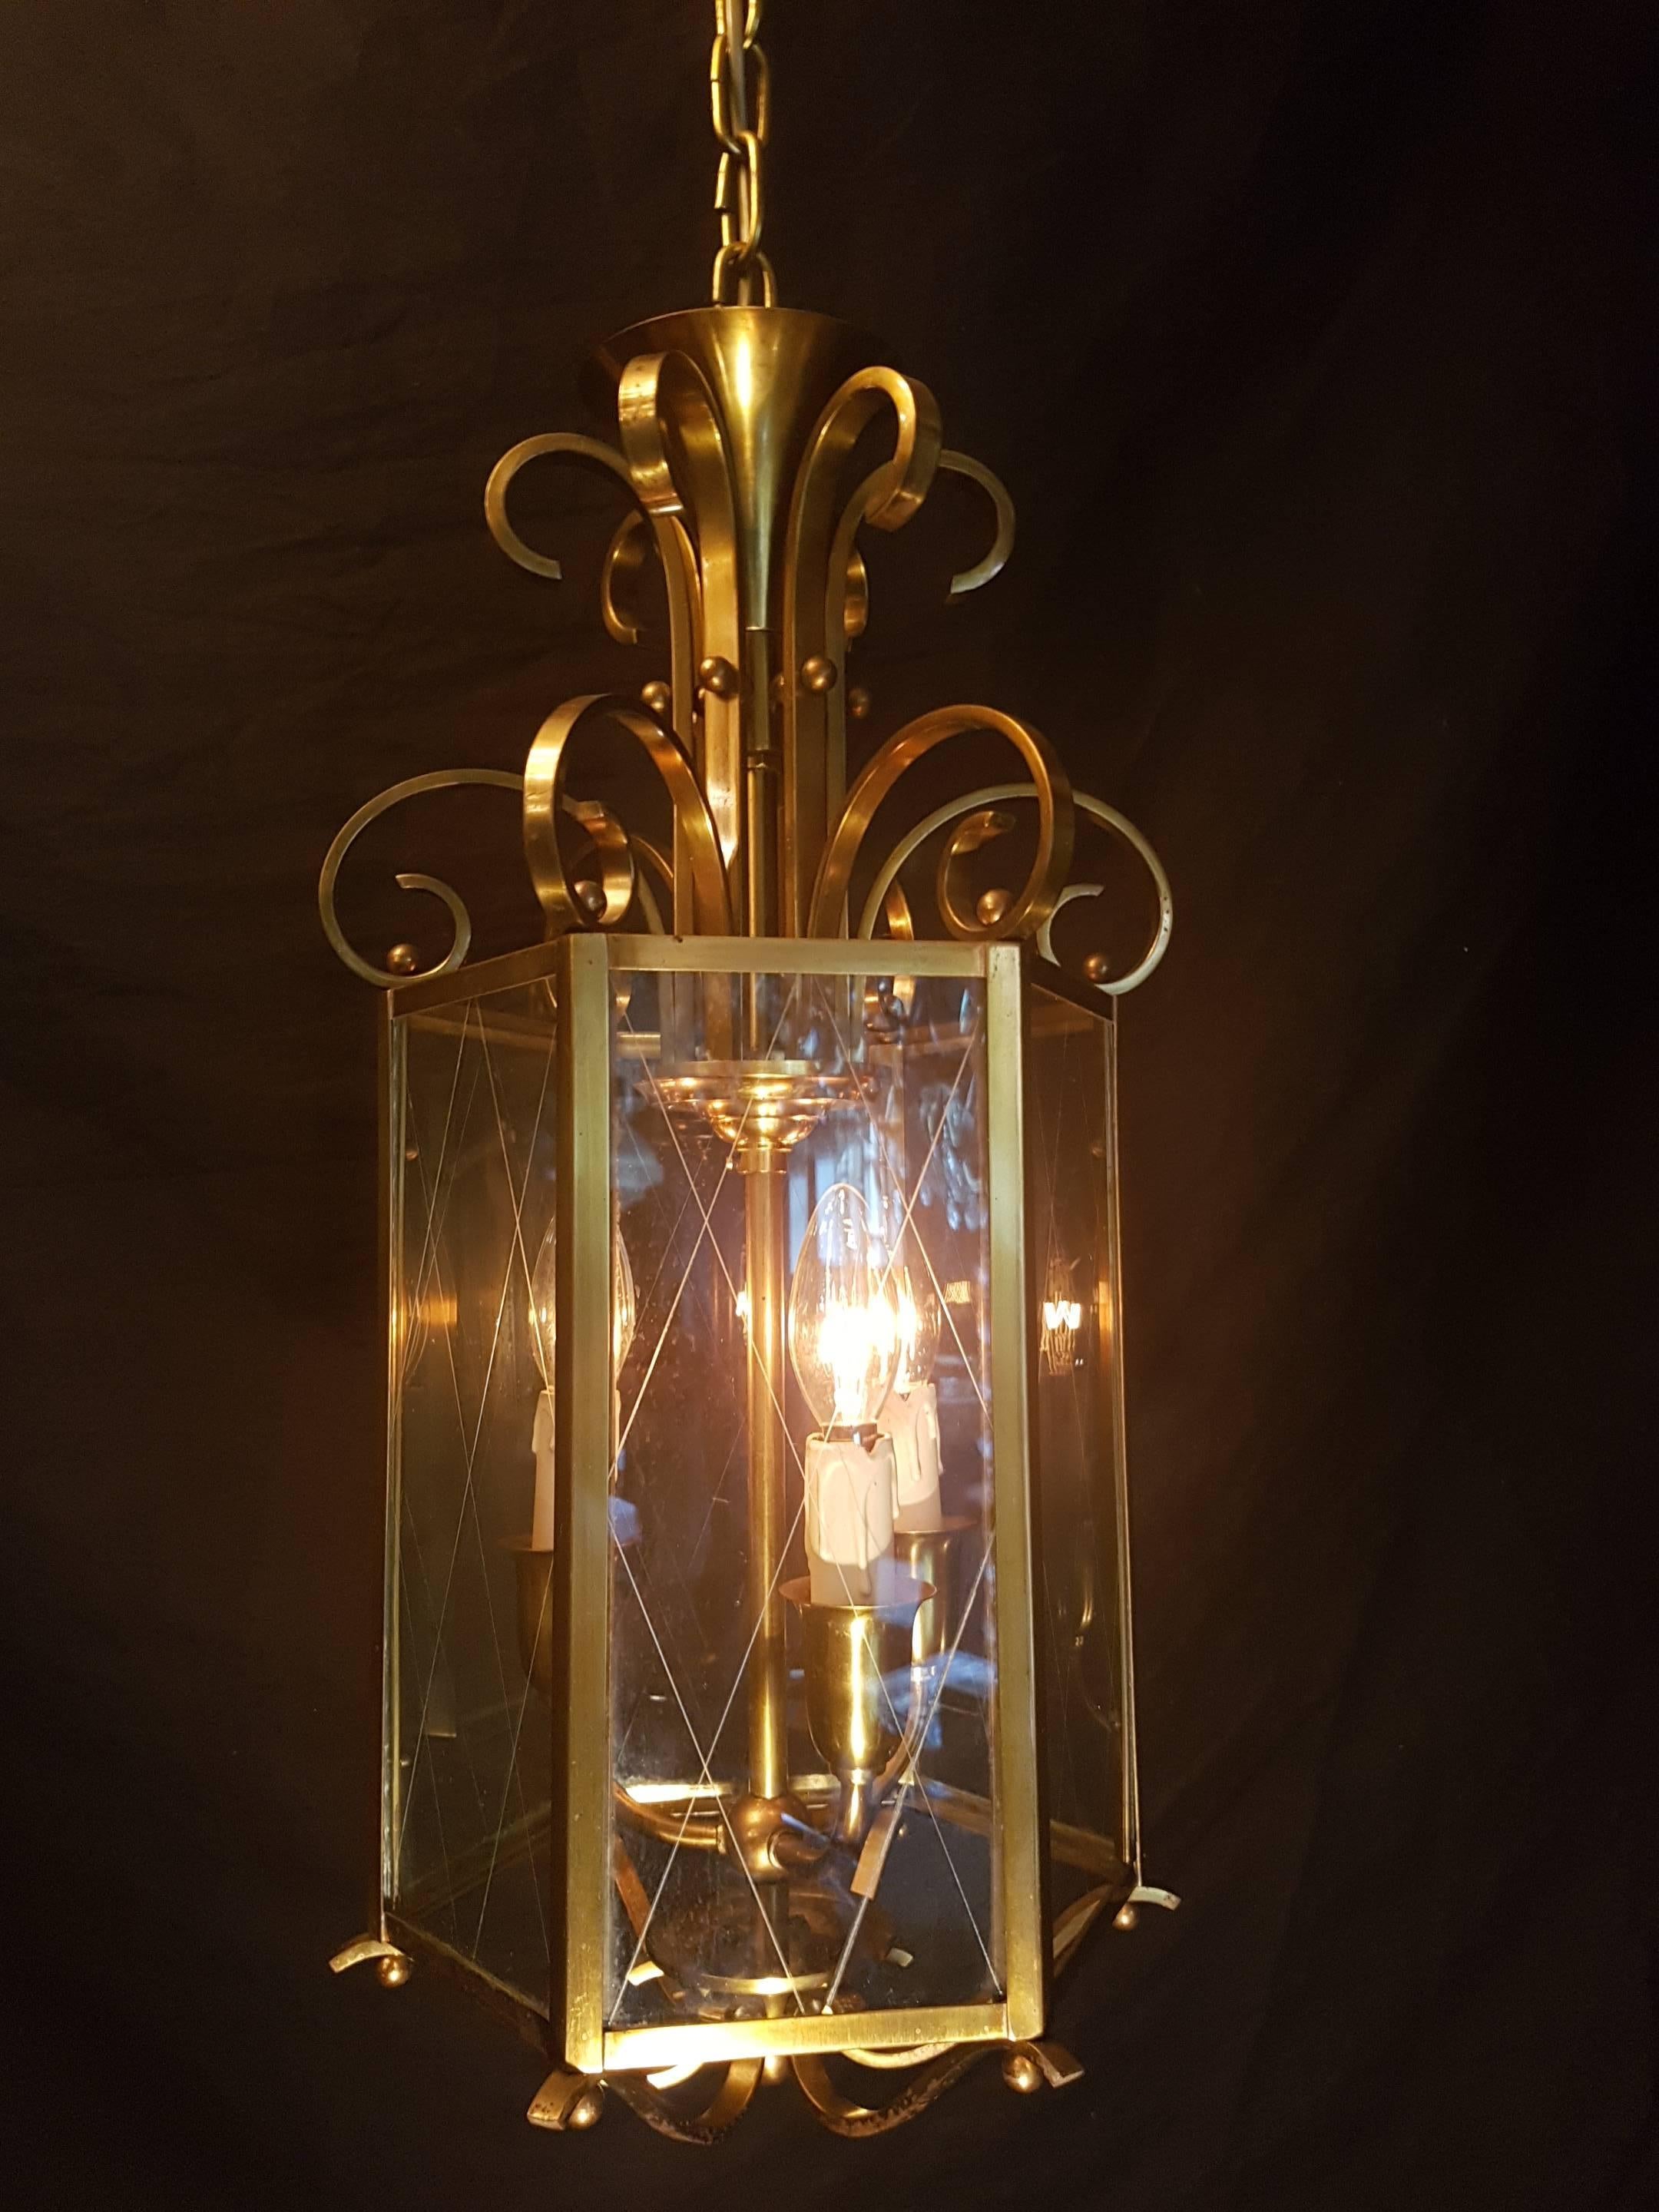 Three-light brass and glass hexagonal lantern with a delicate rhombic pattern on the glass.